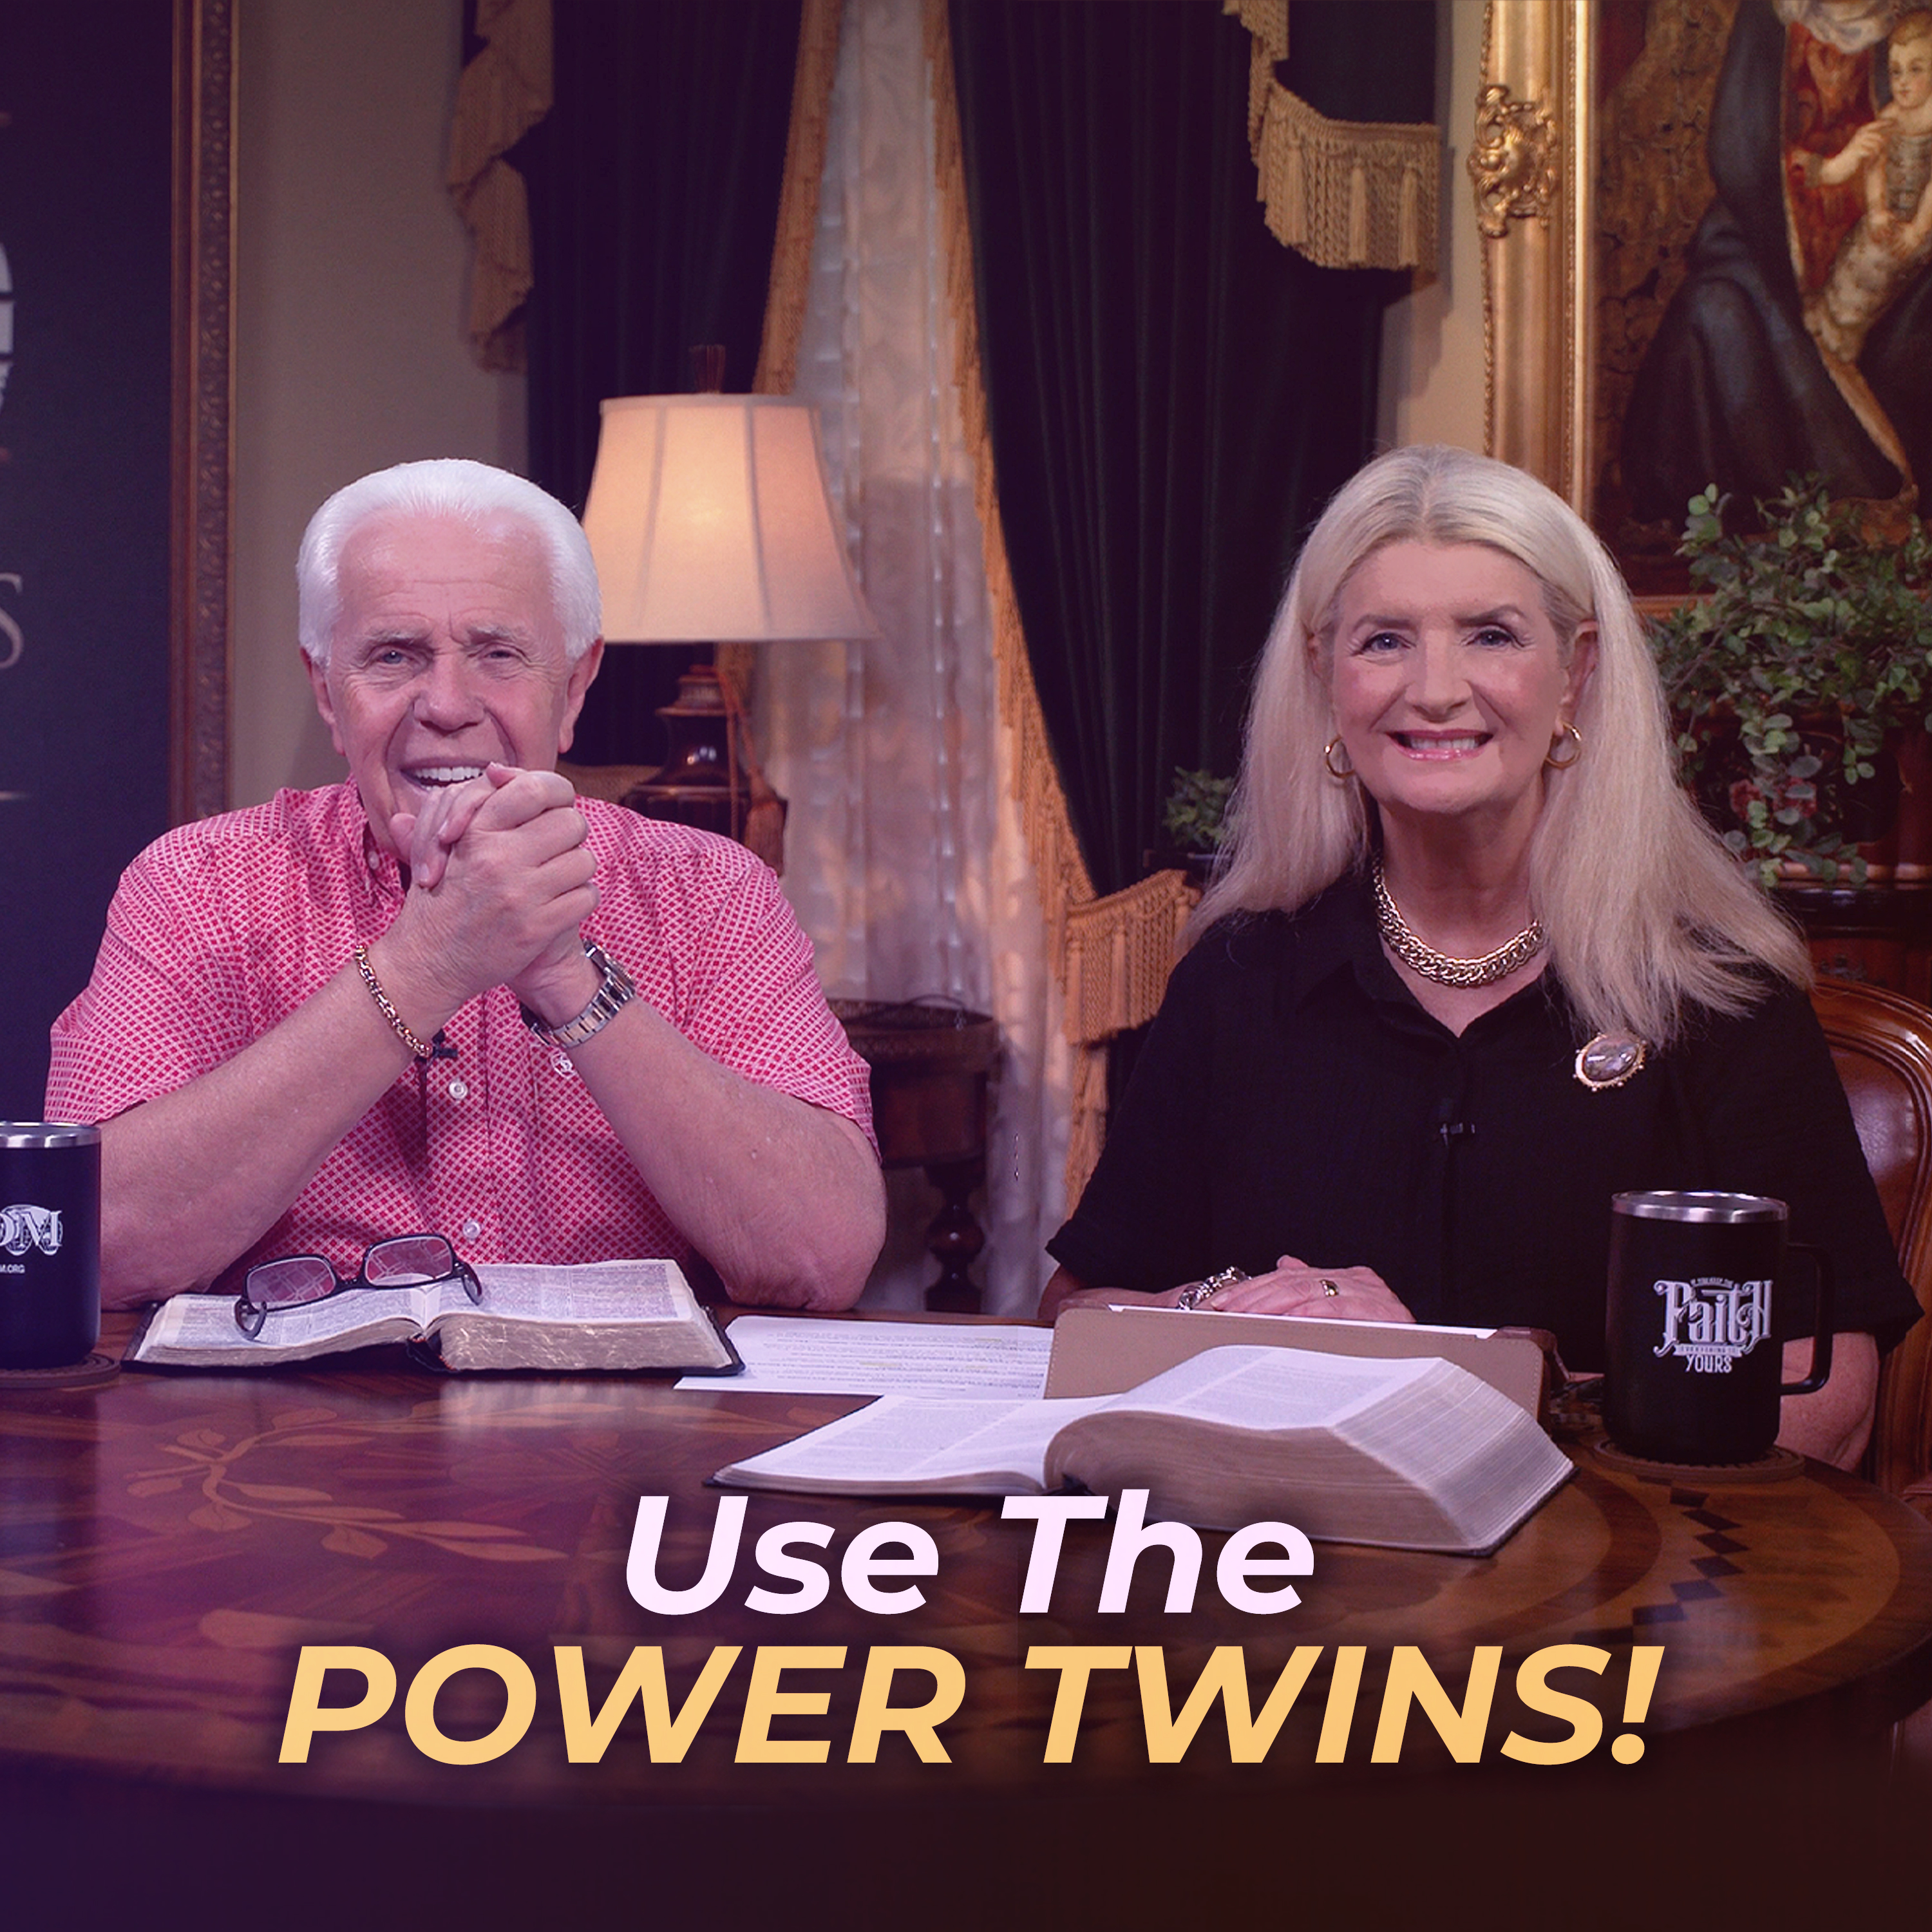 Use The Power Twins!